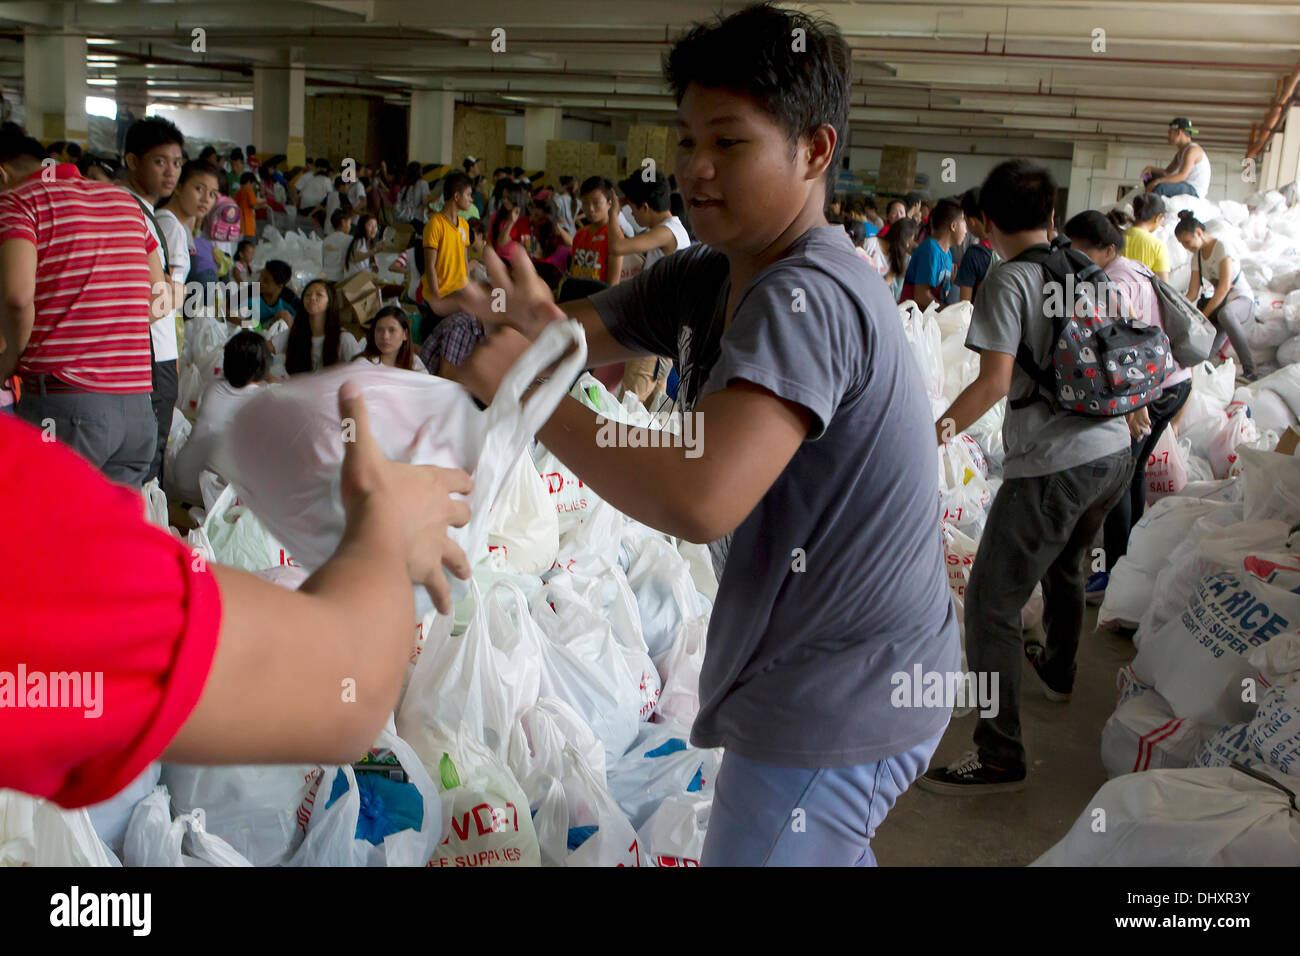 International Convention Centre,Cebu City 16/11/2013. A Cebu City initiative involving a number of Government Agencies in the aftermath of Typhoon Haiyan/Yolanda. A 24hr relief aid operation involves the receiving and re-packing of food items destined for the hardest hit areas. Volunteers are mainly students. Relief packs contain 6 kilos of rice,5 tins of sardines,5 tins of corned beef/beef loaf. Stock Photo